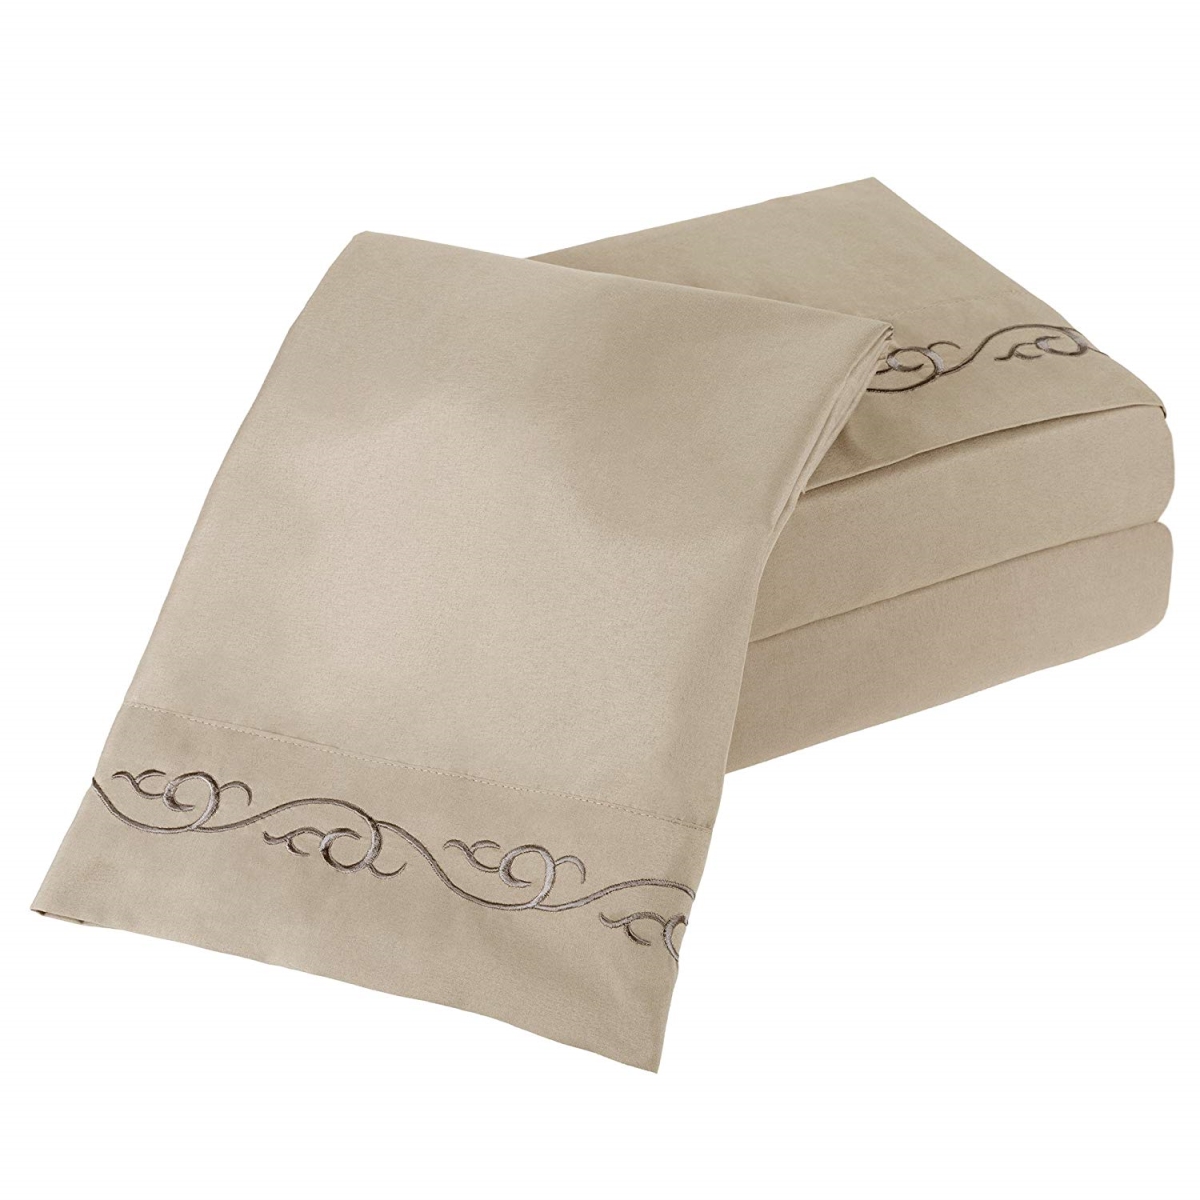 61a-17262 Embroidered Brushed Microfiber Sheets Set, Twin Size - Taupe - 3 Piece